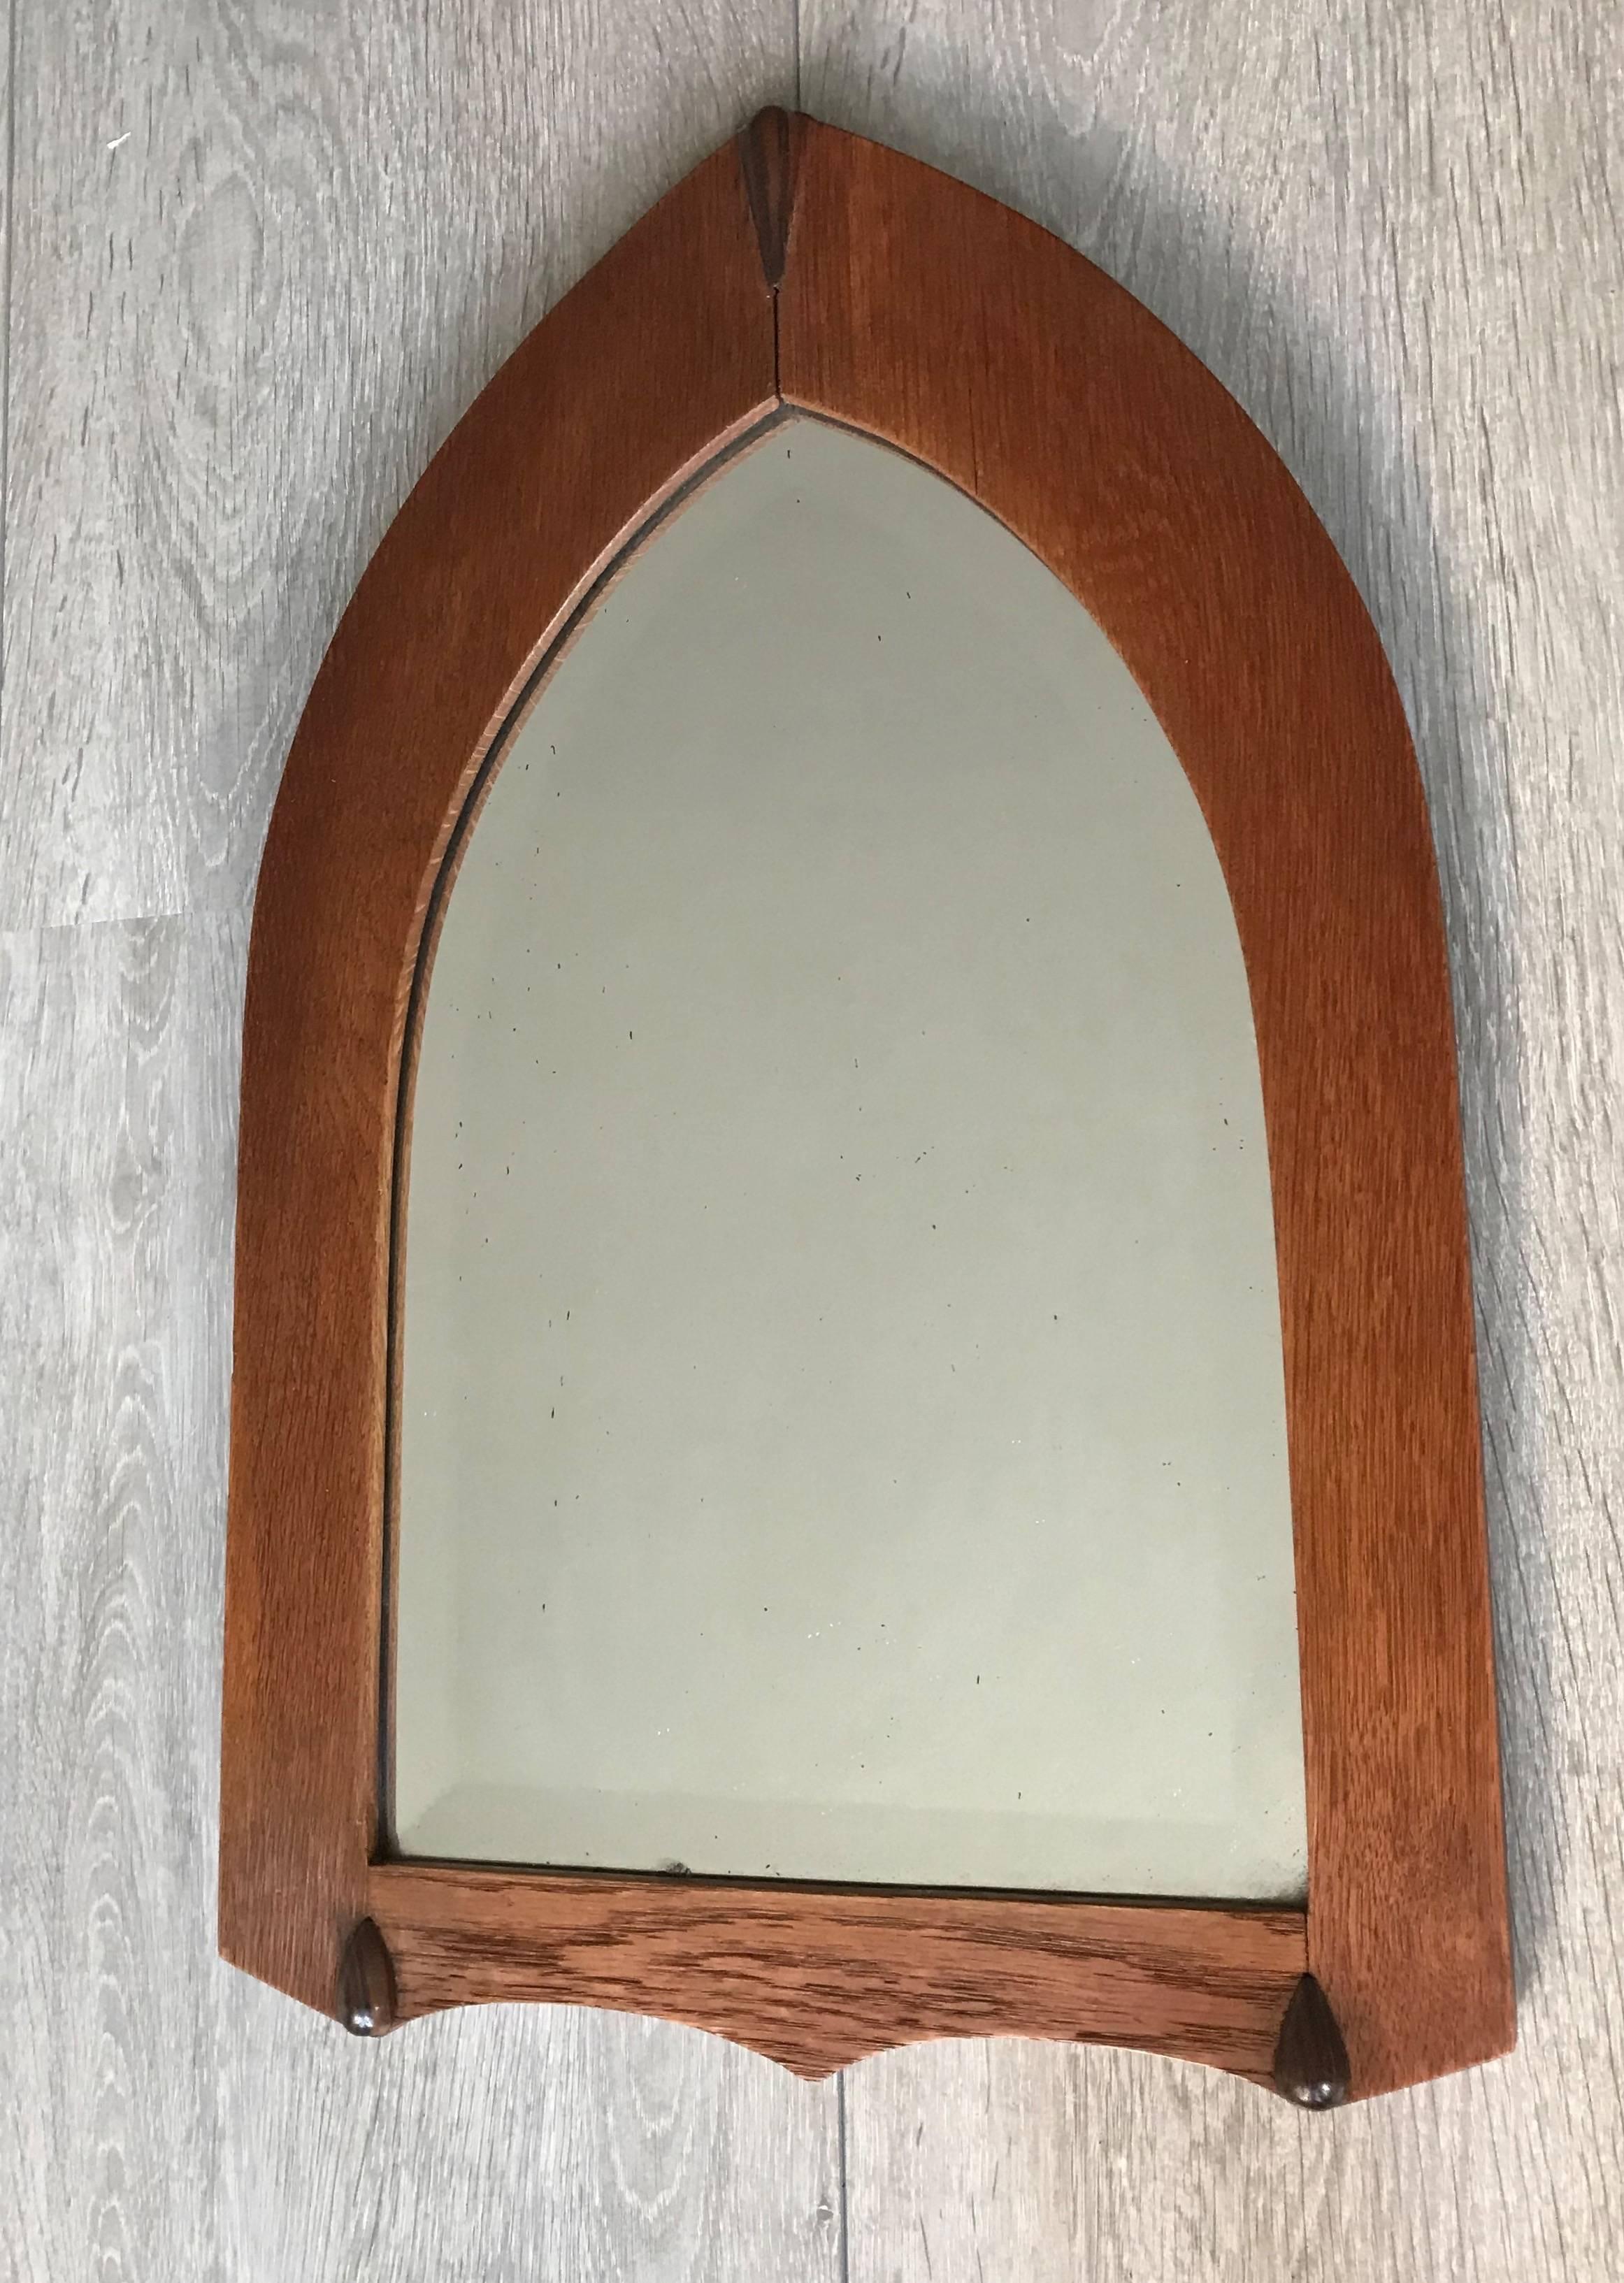 Early 20th century, practical and stylish wall mirror.

This handcrafted and solid oak wall mirror is perfectly decorated with solid hardwood 'drops'. The shape of both the frame and bevelled mirror are perfectly accentuated by the grain in the